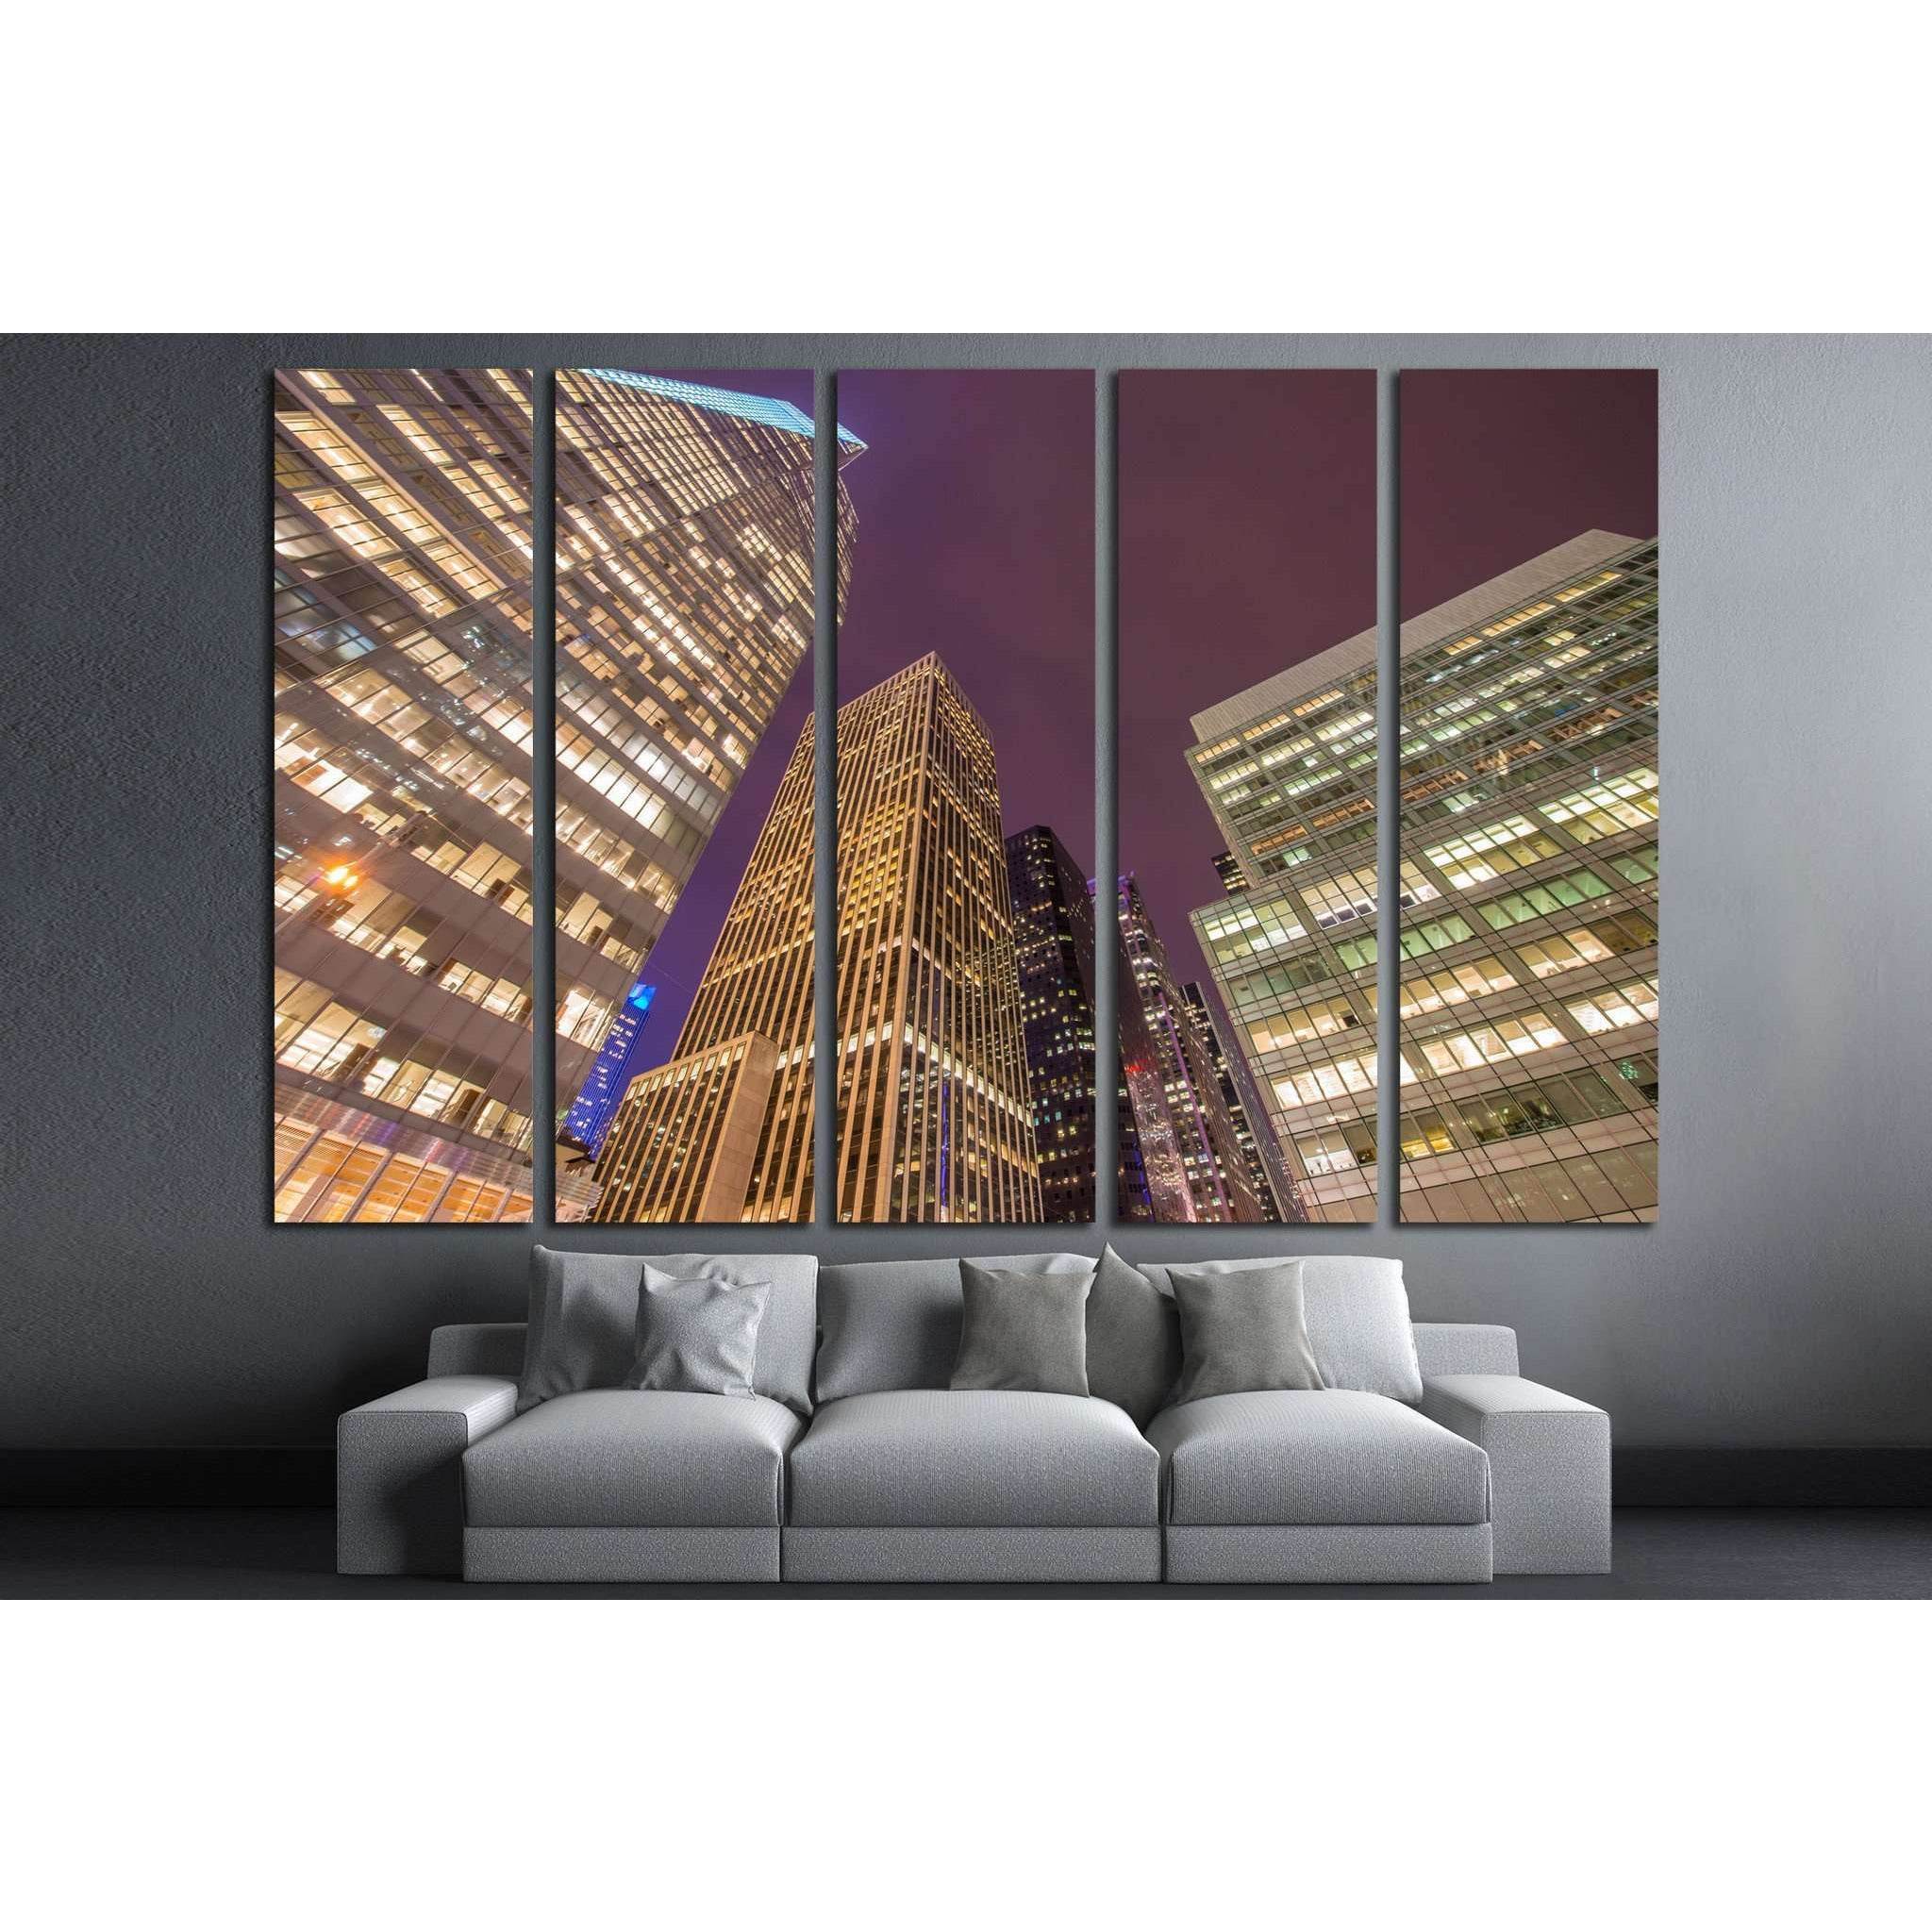 Famous skyscrapers of New York at night №1523 Ready to Hang Canvas Print